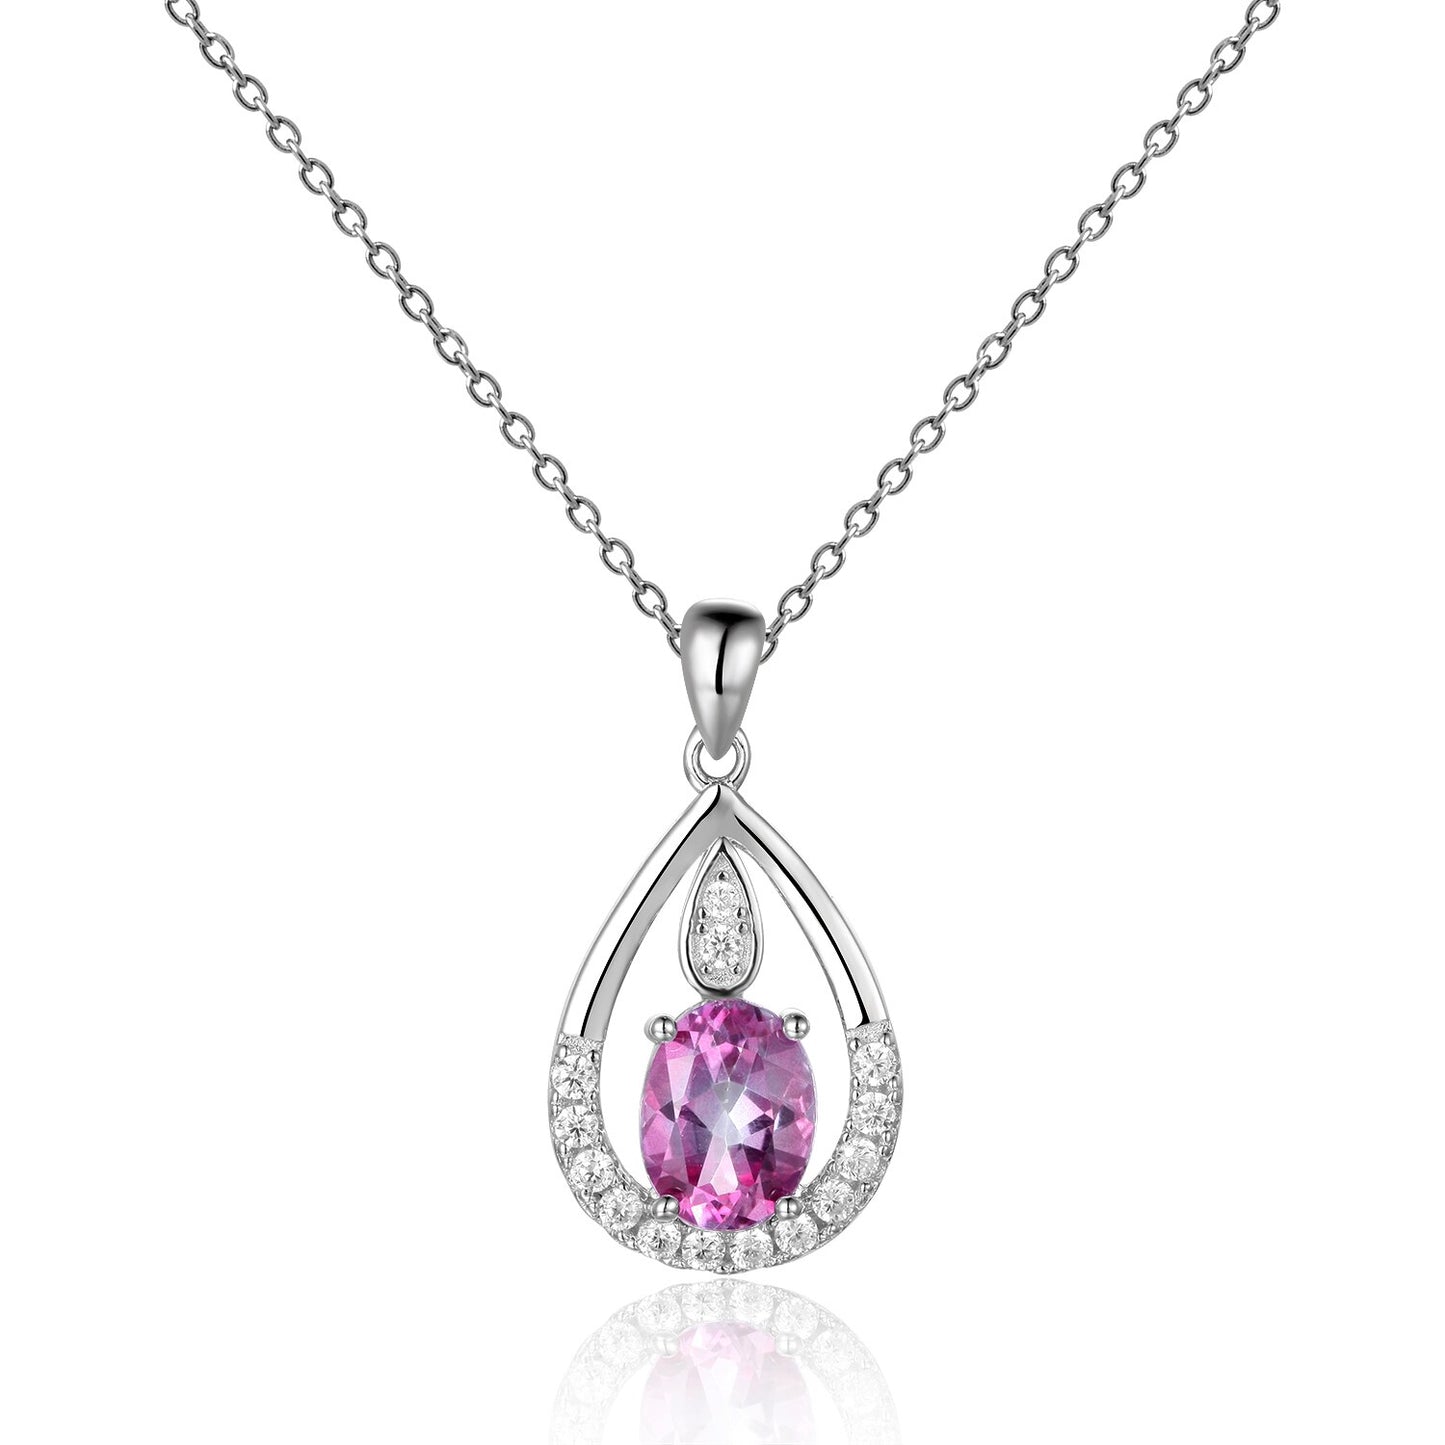 Gem&#39;s Ballet December Birthstone Topaz Necklace 6x8mm Oval Pink Topaz Pendant Necklace in 925 Sterling Silver with 18&quot; Chain Pink Topaz